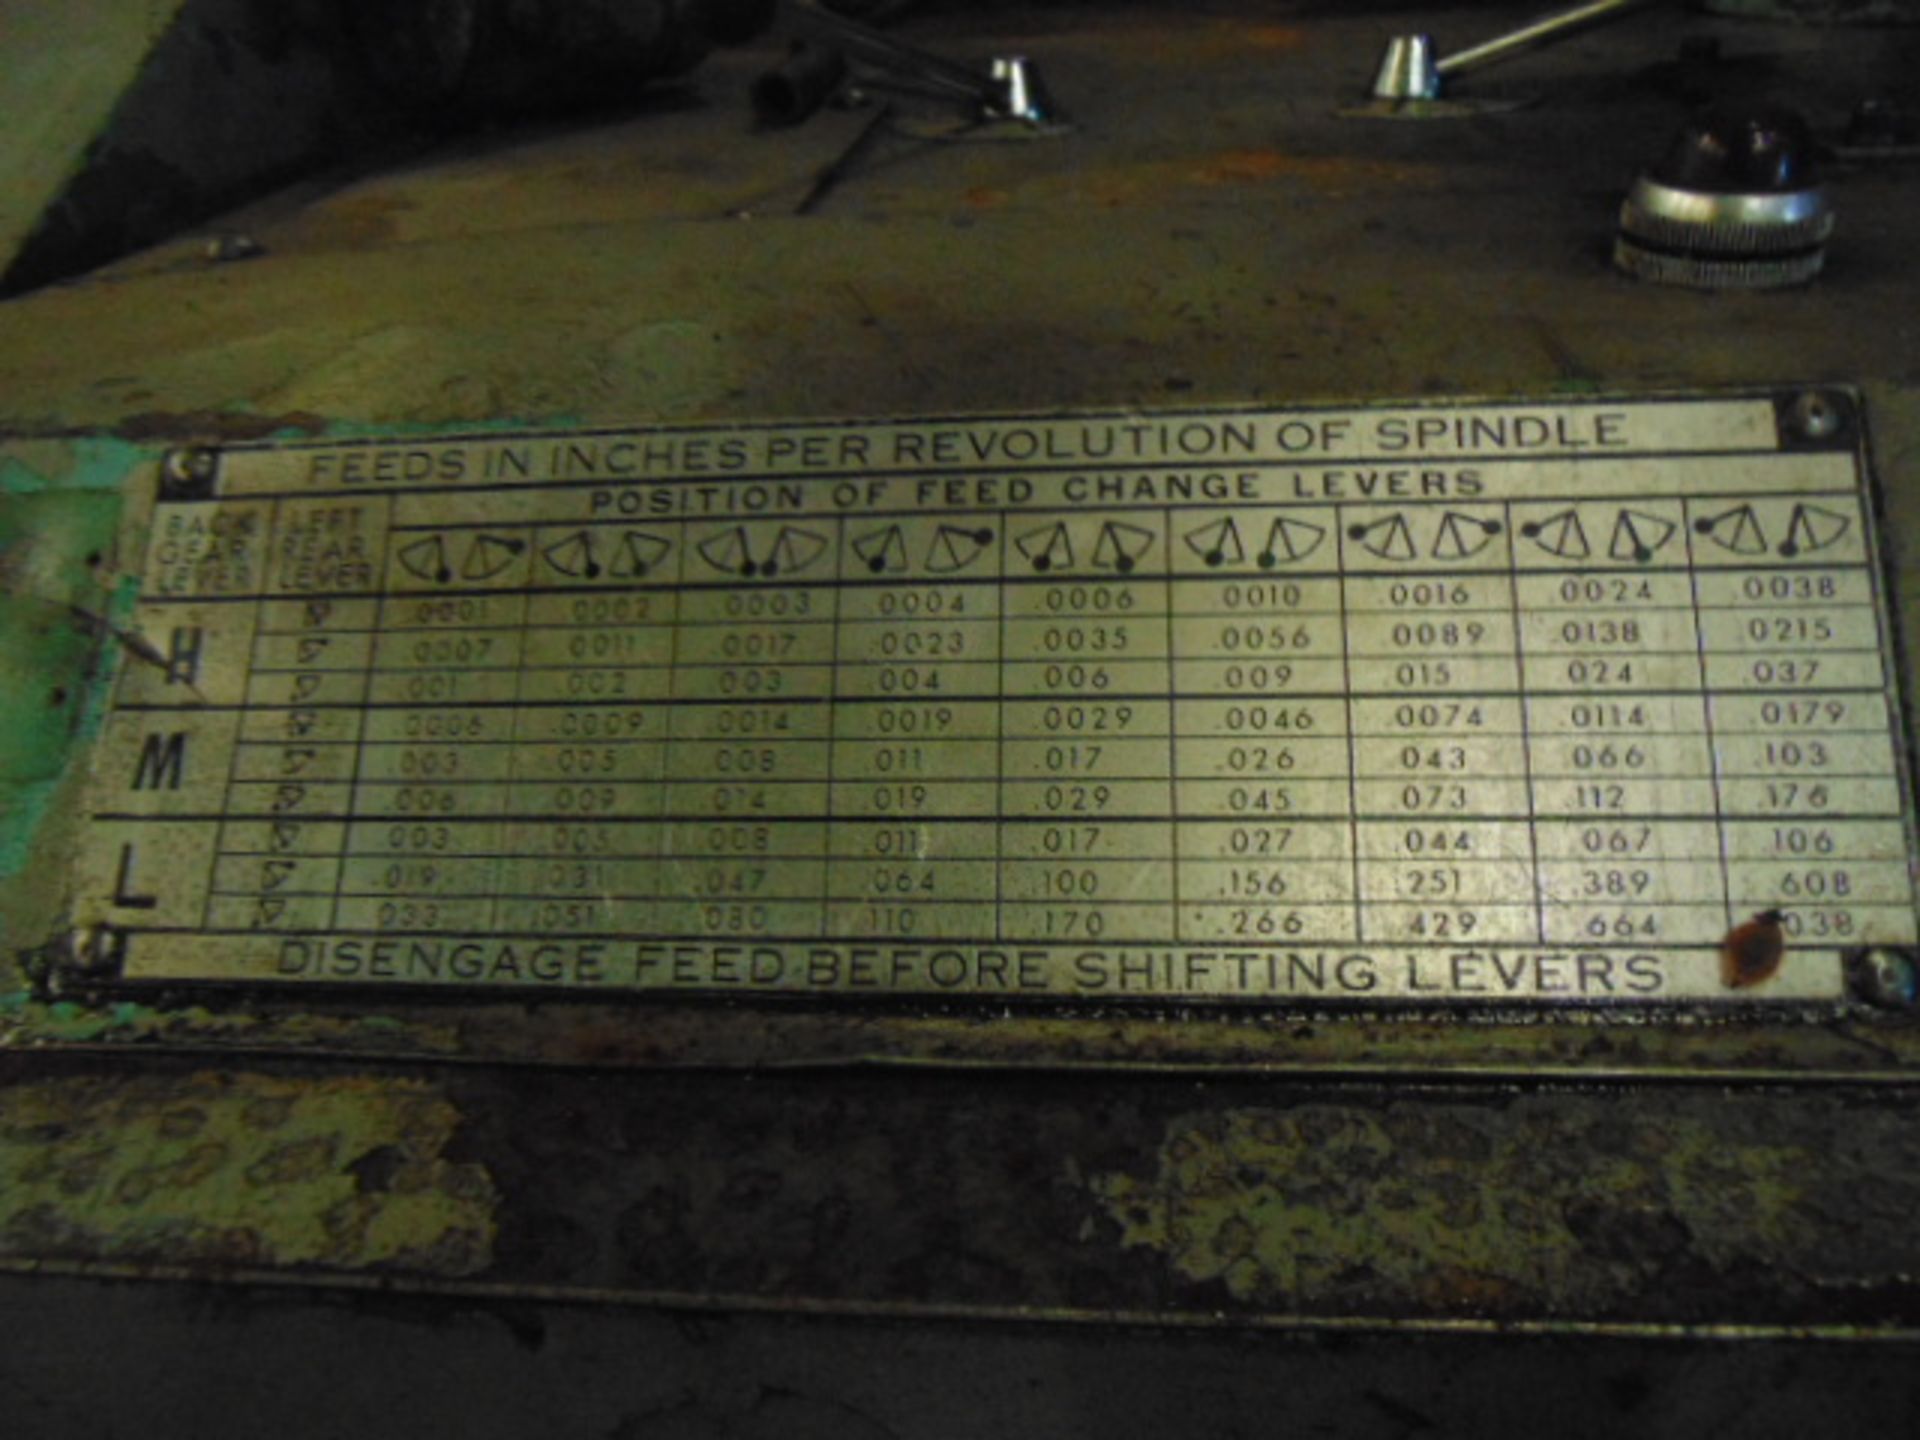 TABLE TYPE HORIZONTAL BORING MILL, LUCAS MDL. 428-60, 40" x 74" tbl., 60" cross travel, approx. - Image 10 of 16